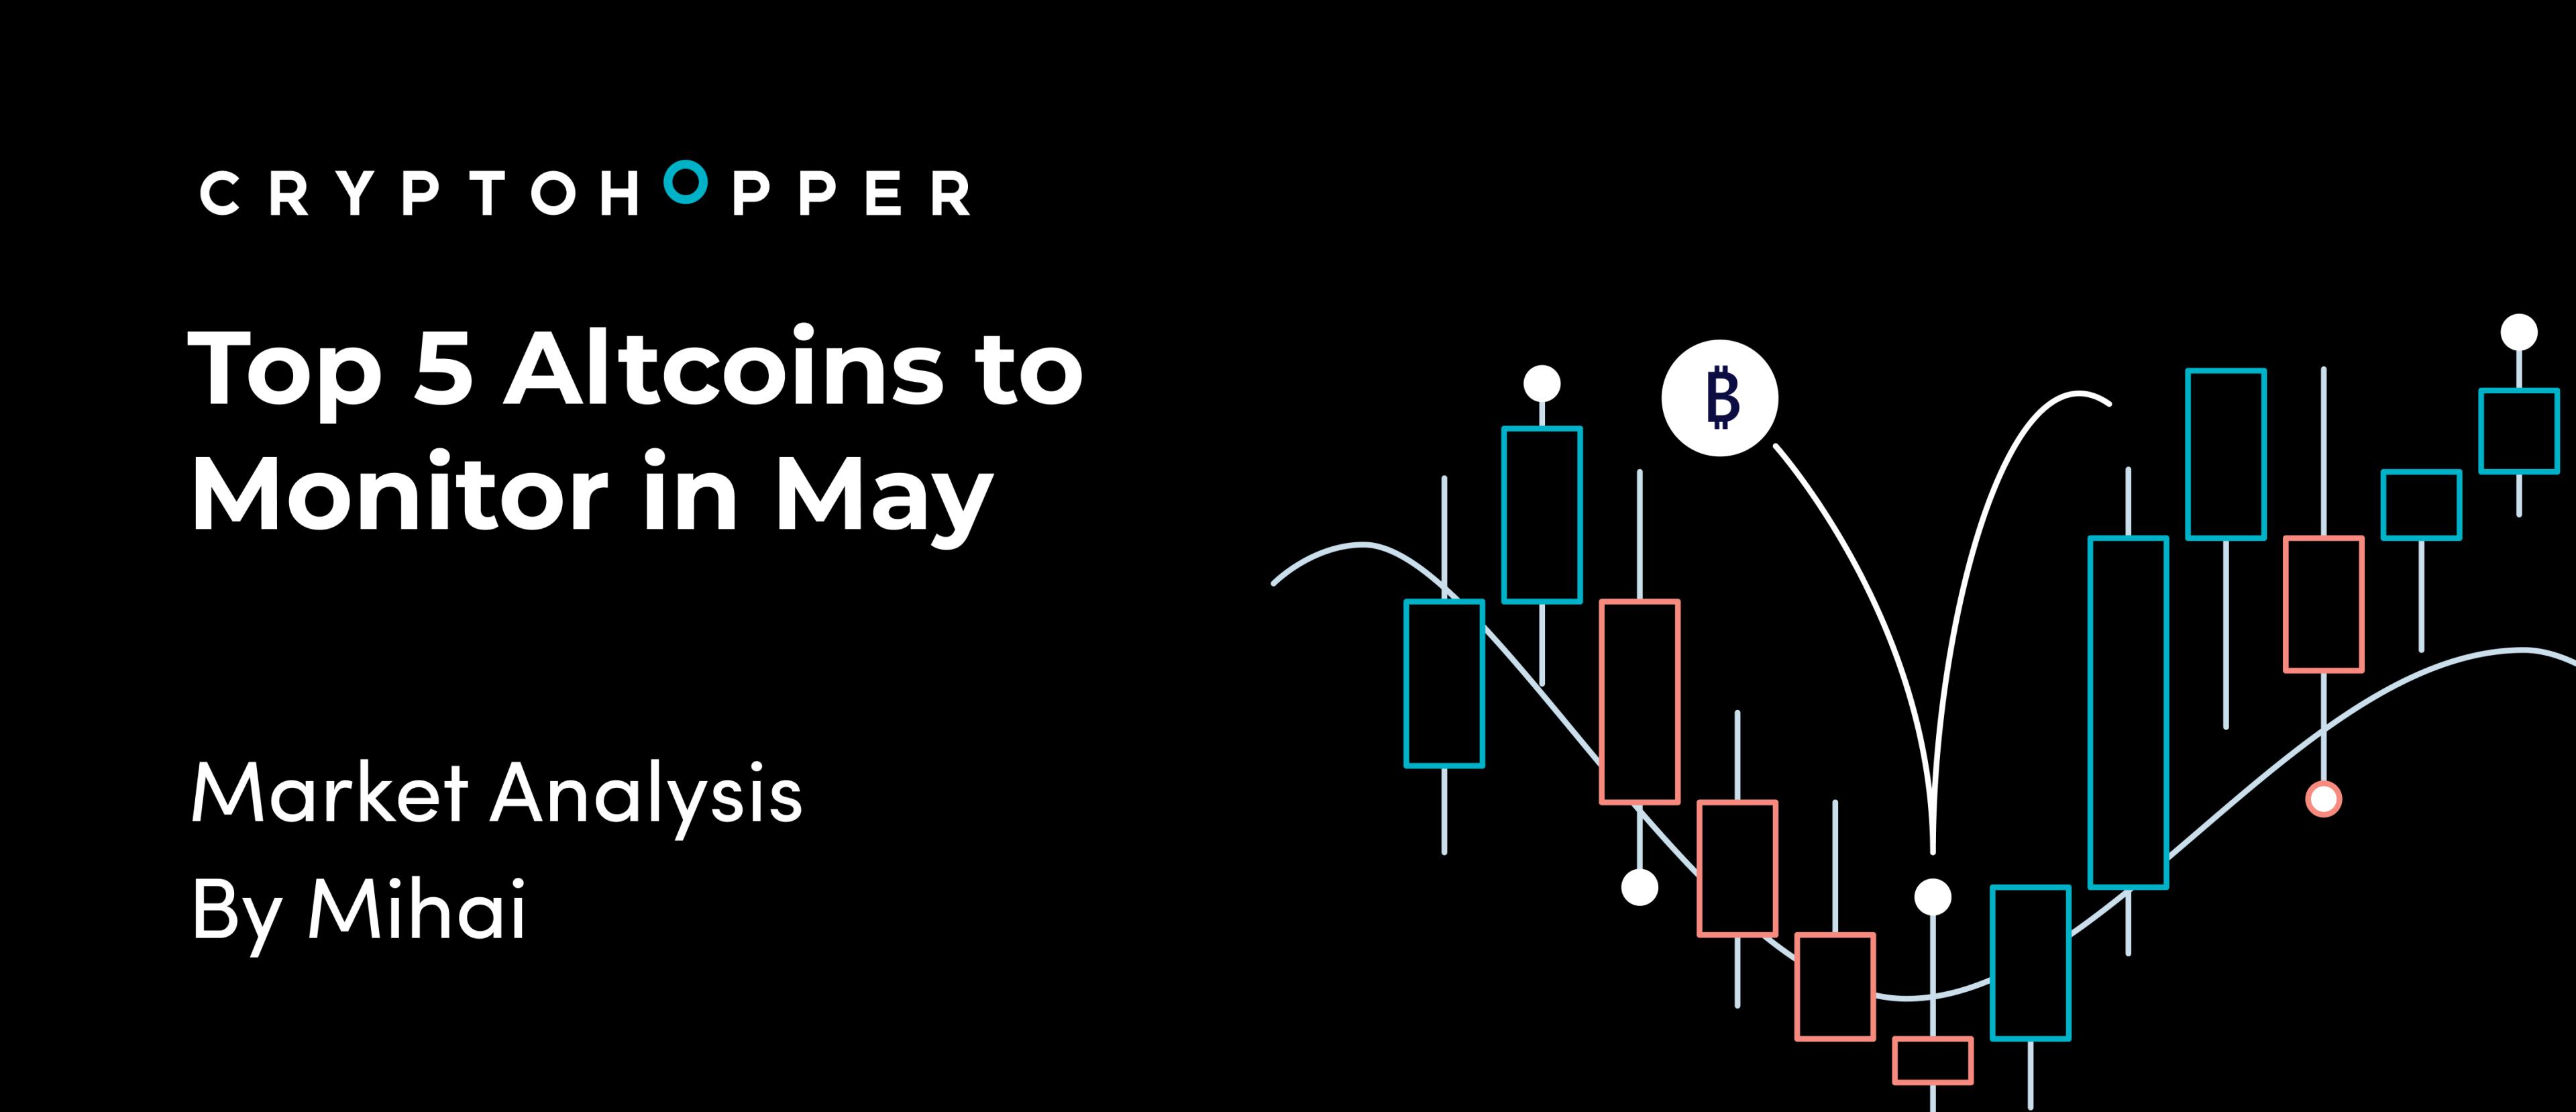 Top 5 Altcoins to Monitor in May